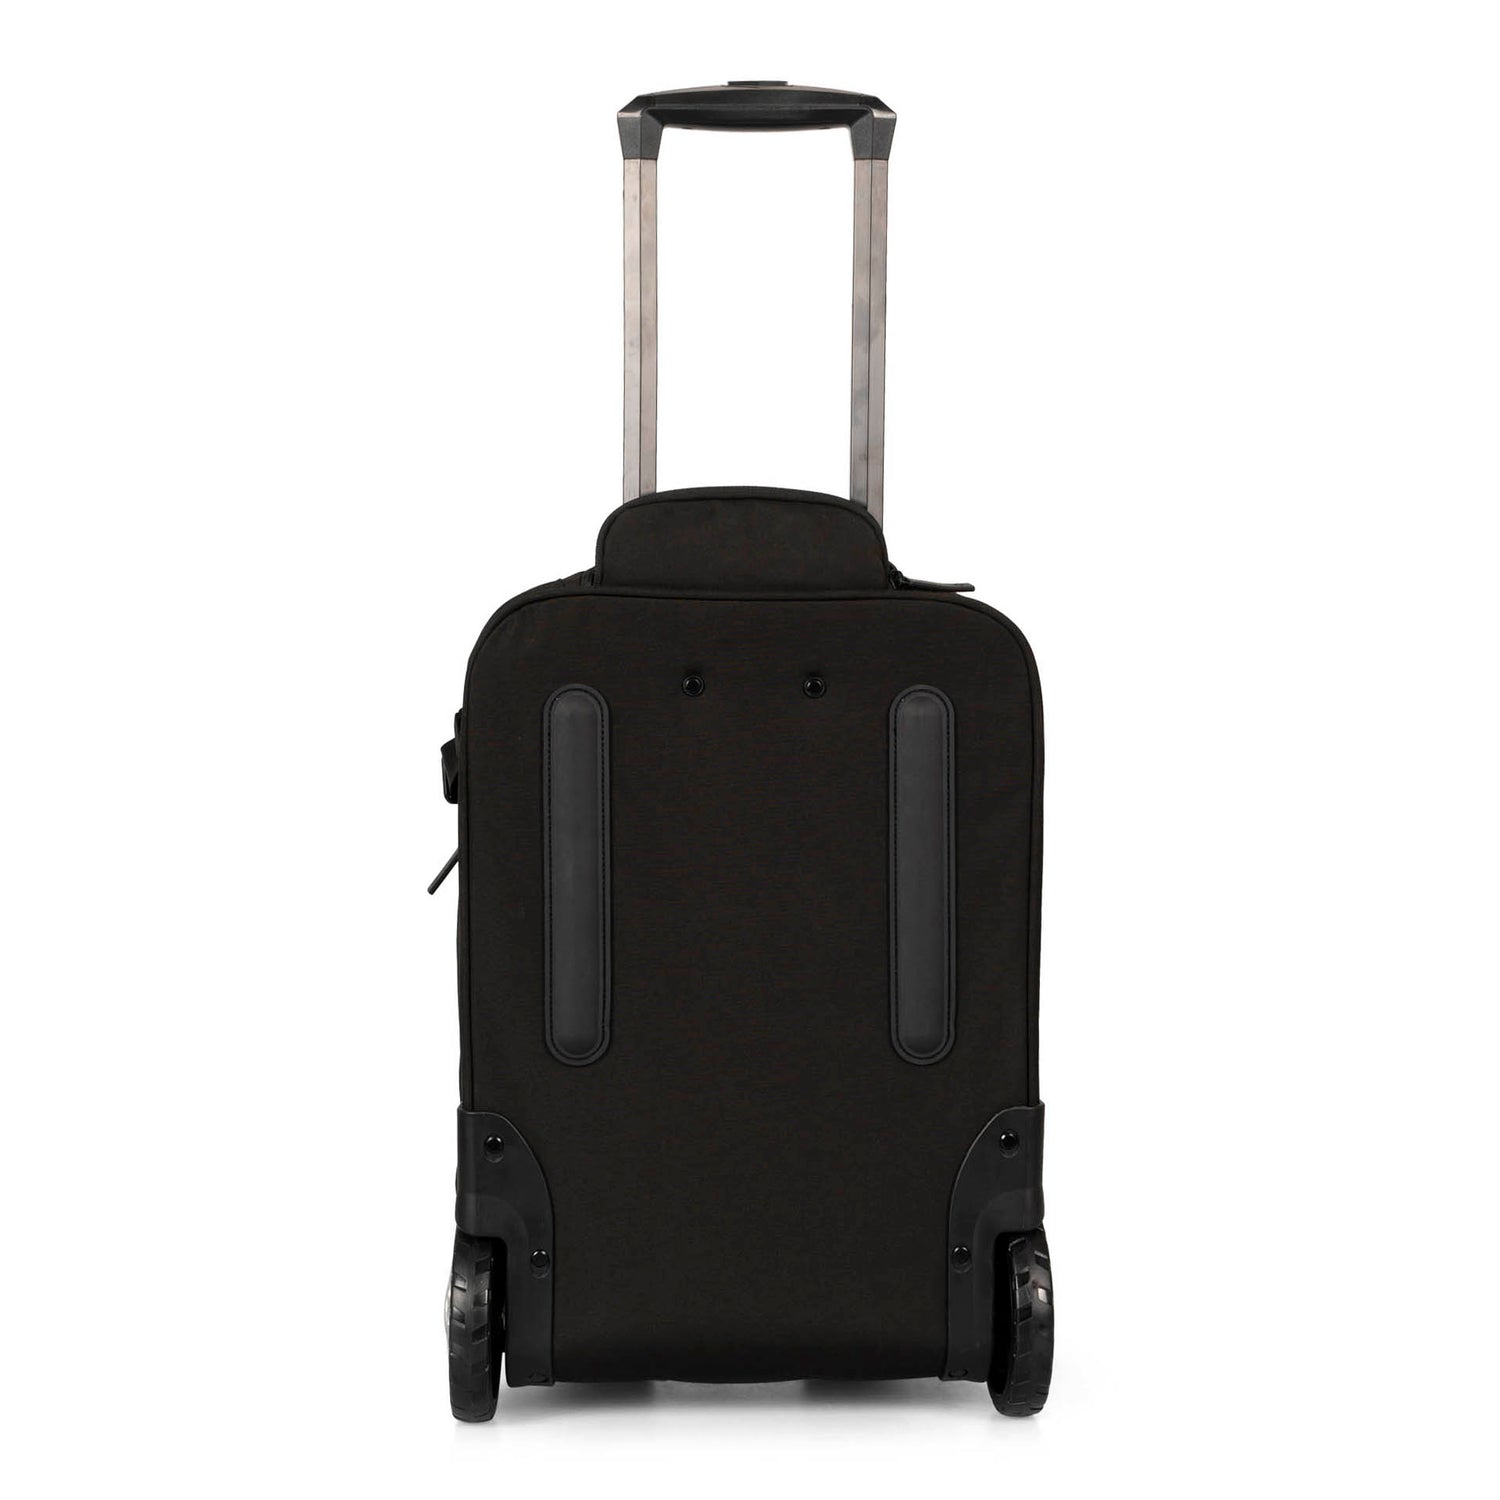 The 5 Continents Duffle Bag on Wheels